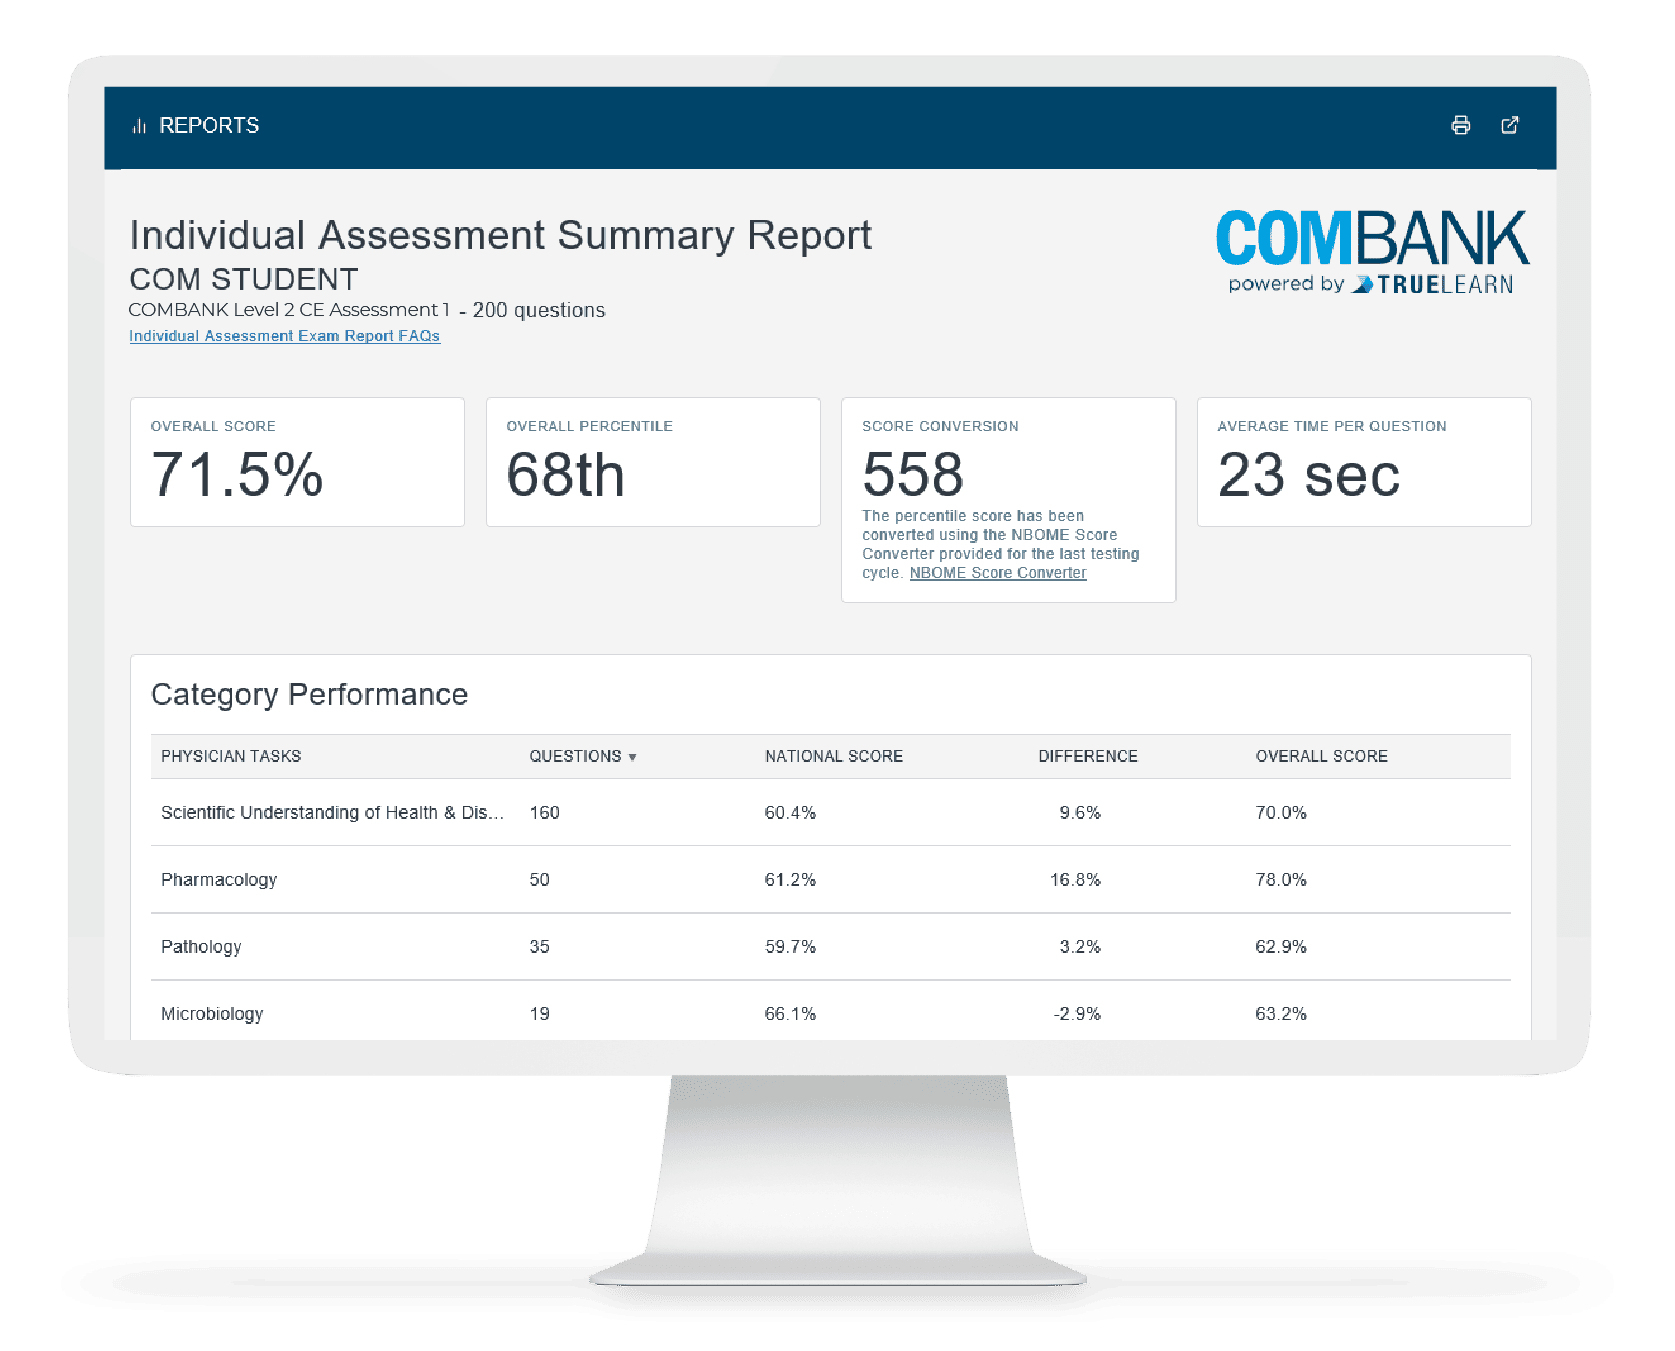 screenshot of COMBANK's individual assessment summary report for Level 2 CE